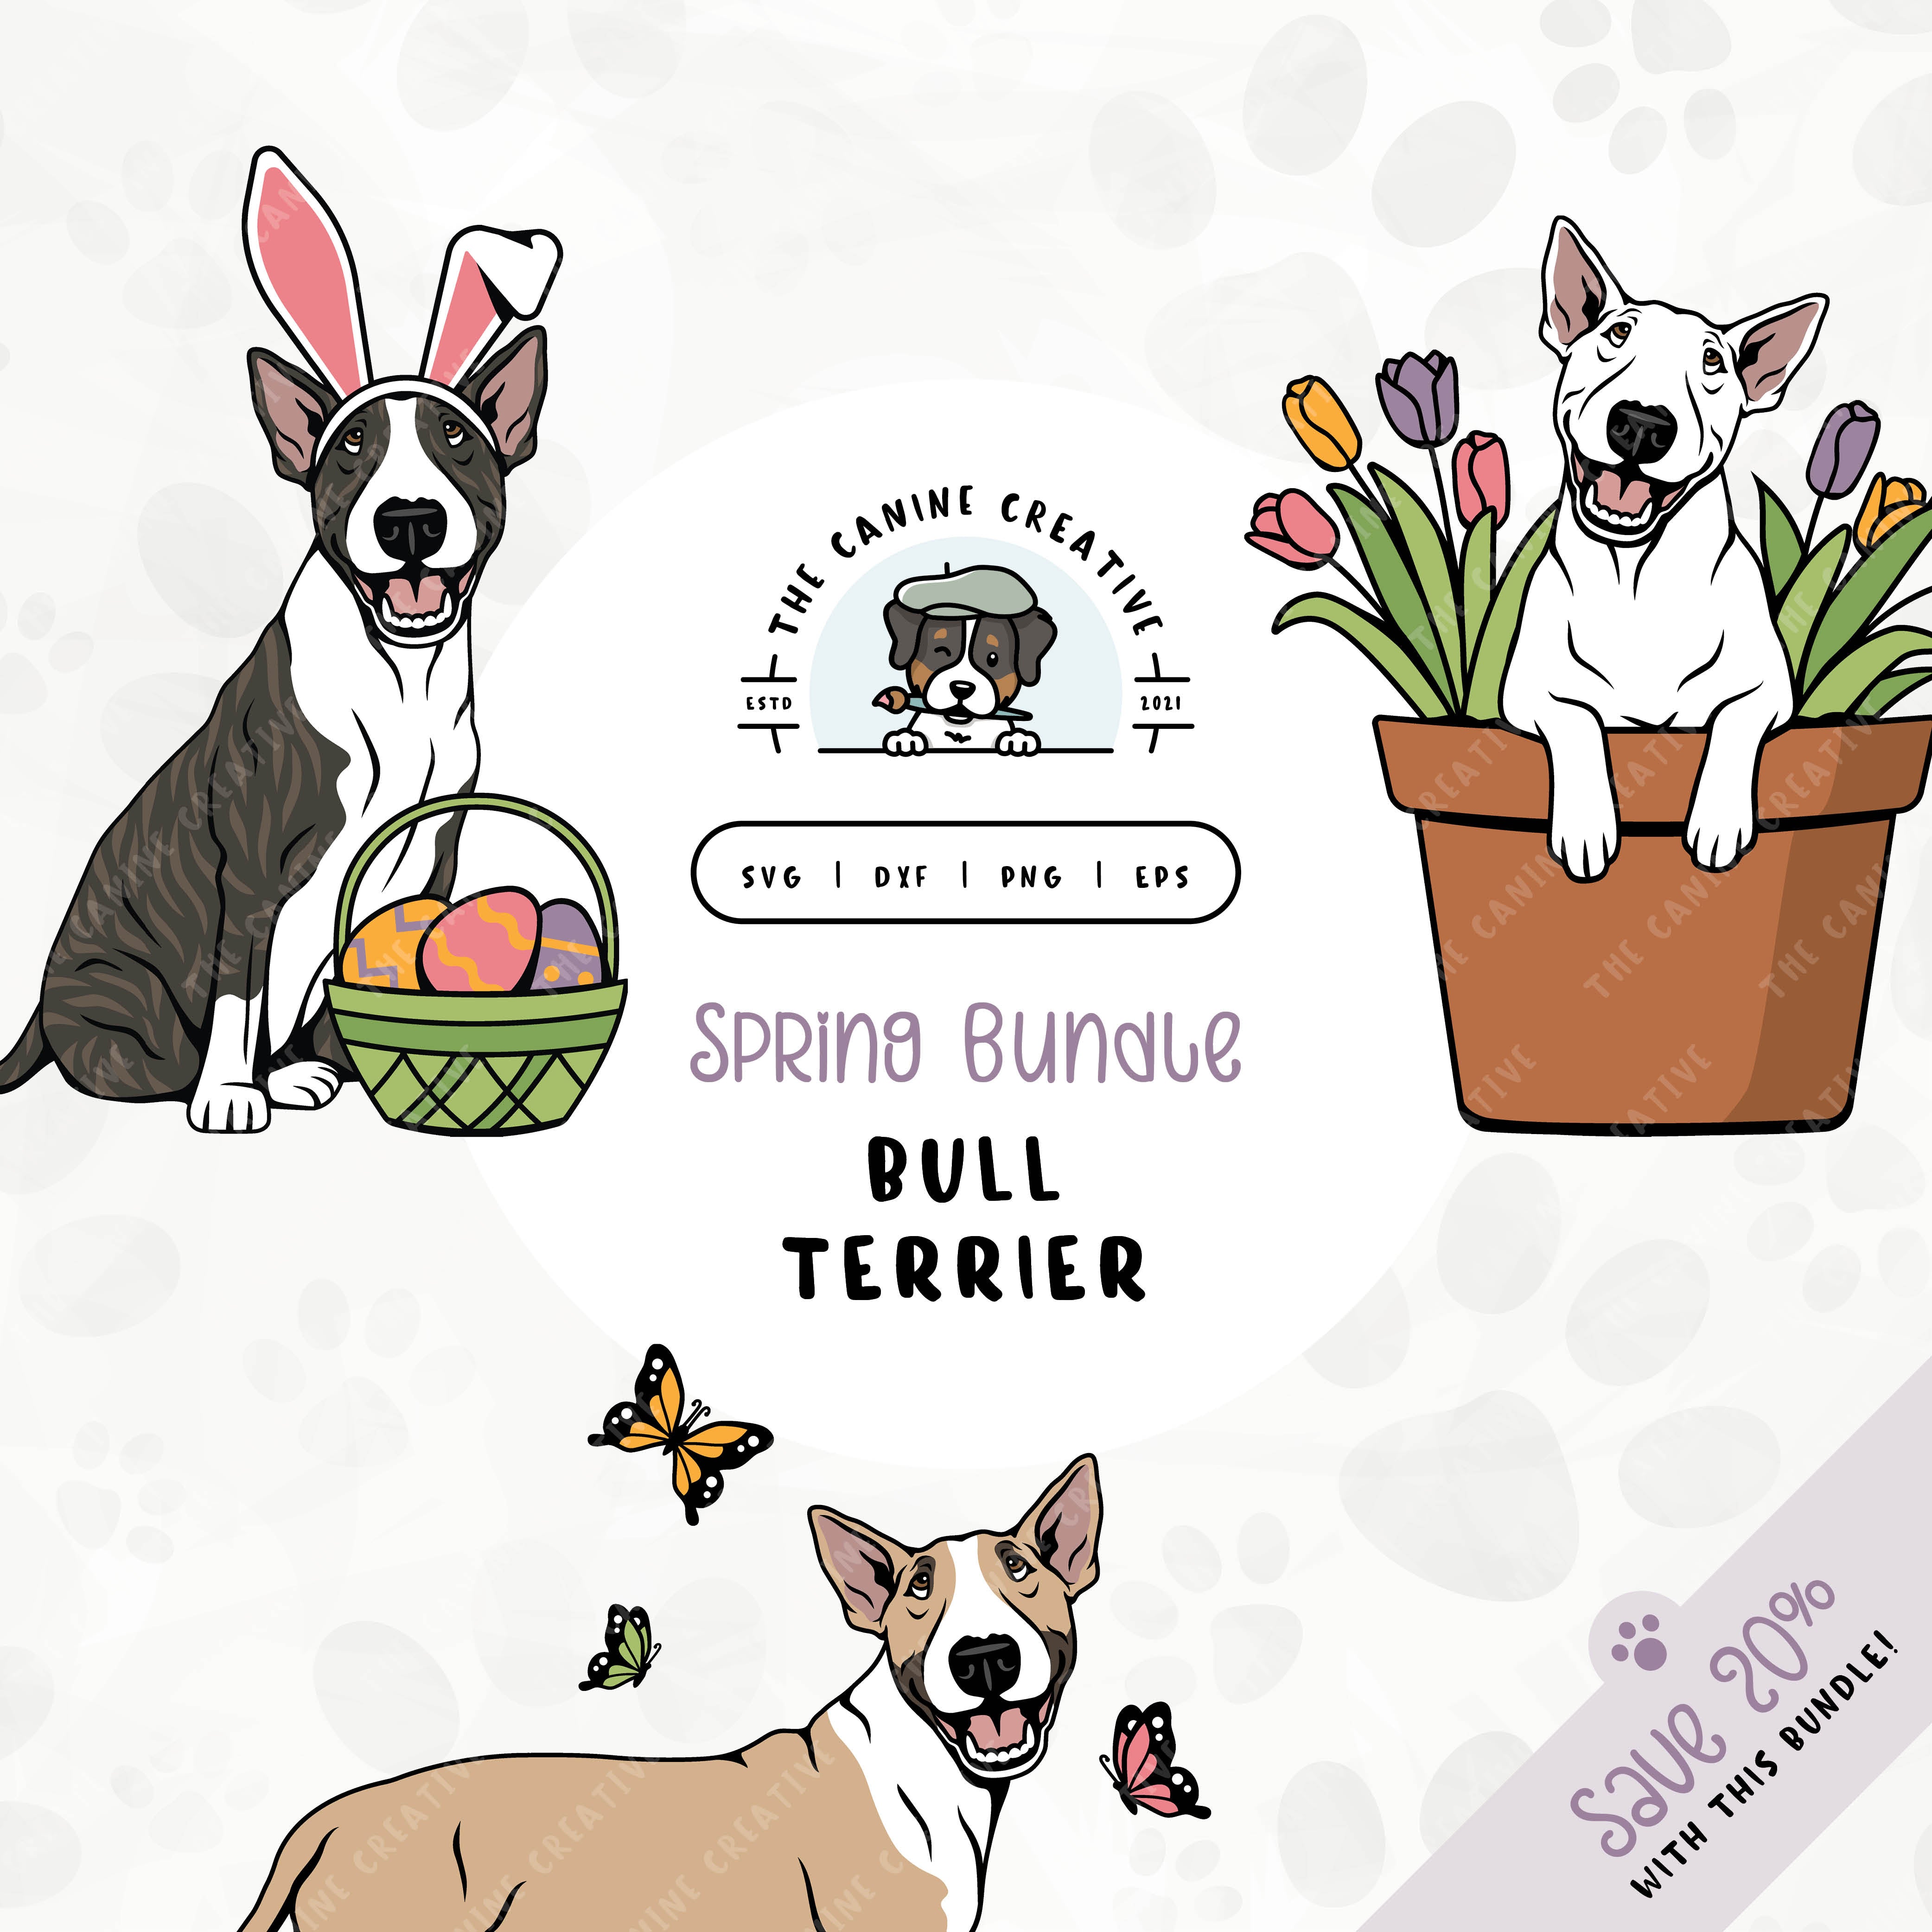 This 3-pack springtime illustration bundle features Bull Terriers among colorful butterflies, peeking out from a pot of vibrant tulips, and wearing festive bunny ears while sitting near a basket of brightly-colored Easter eggs. File formats include: SVG, DXF, PNG, and EPS.